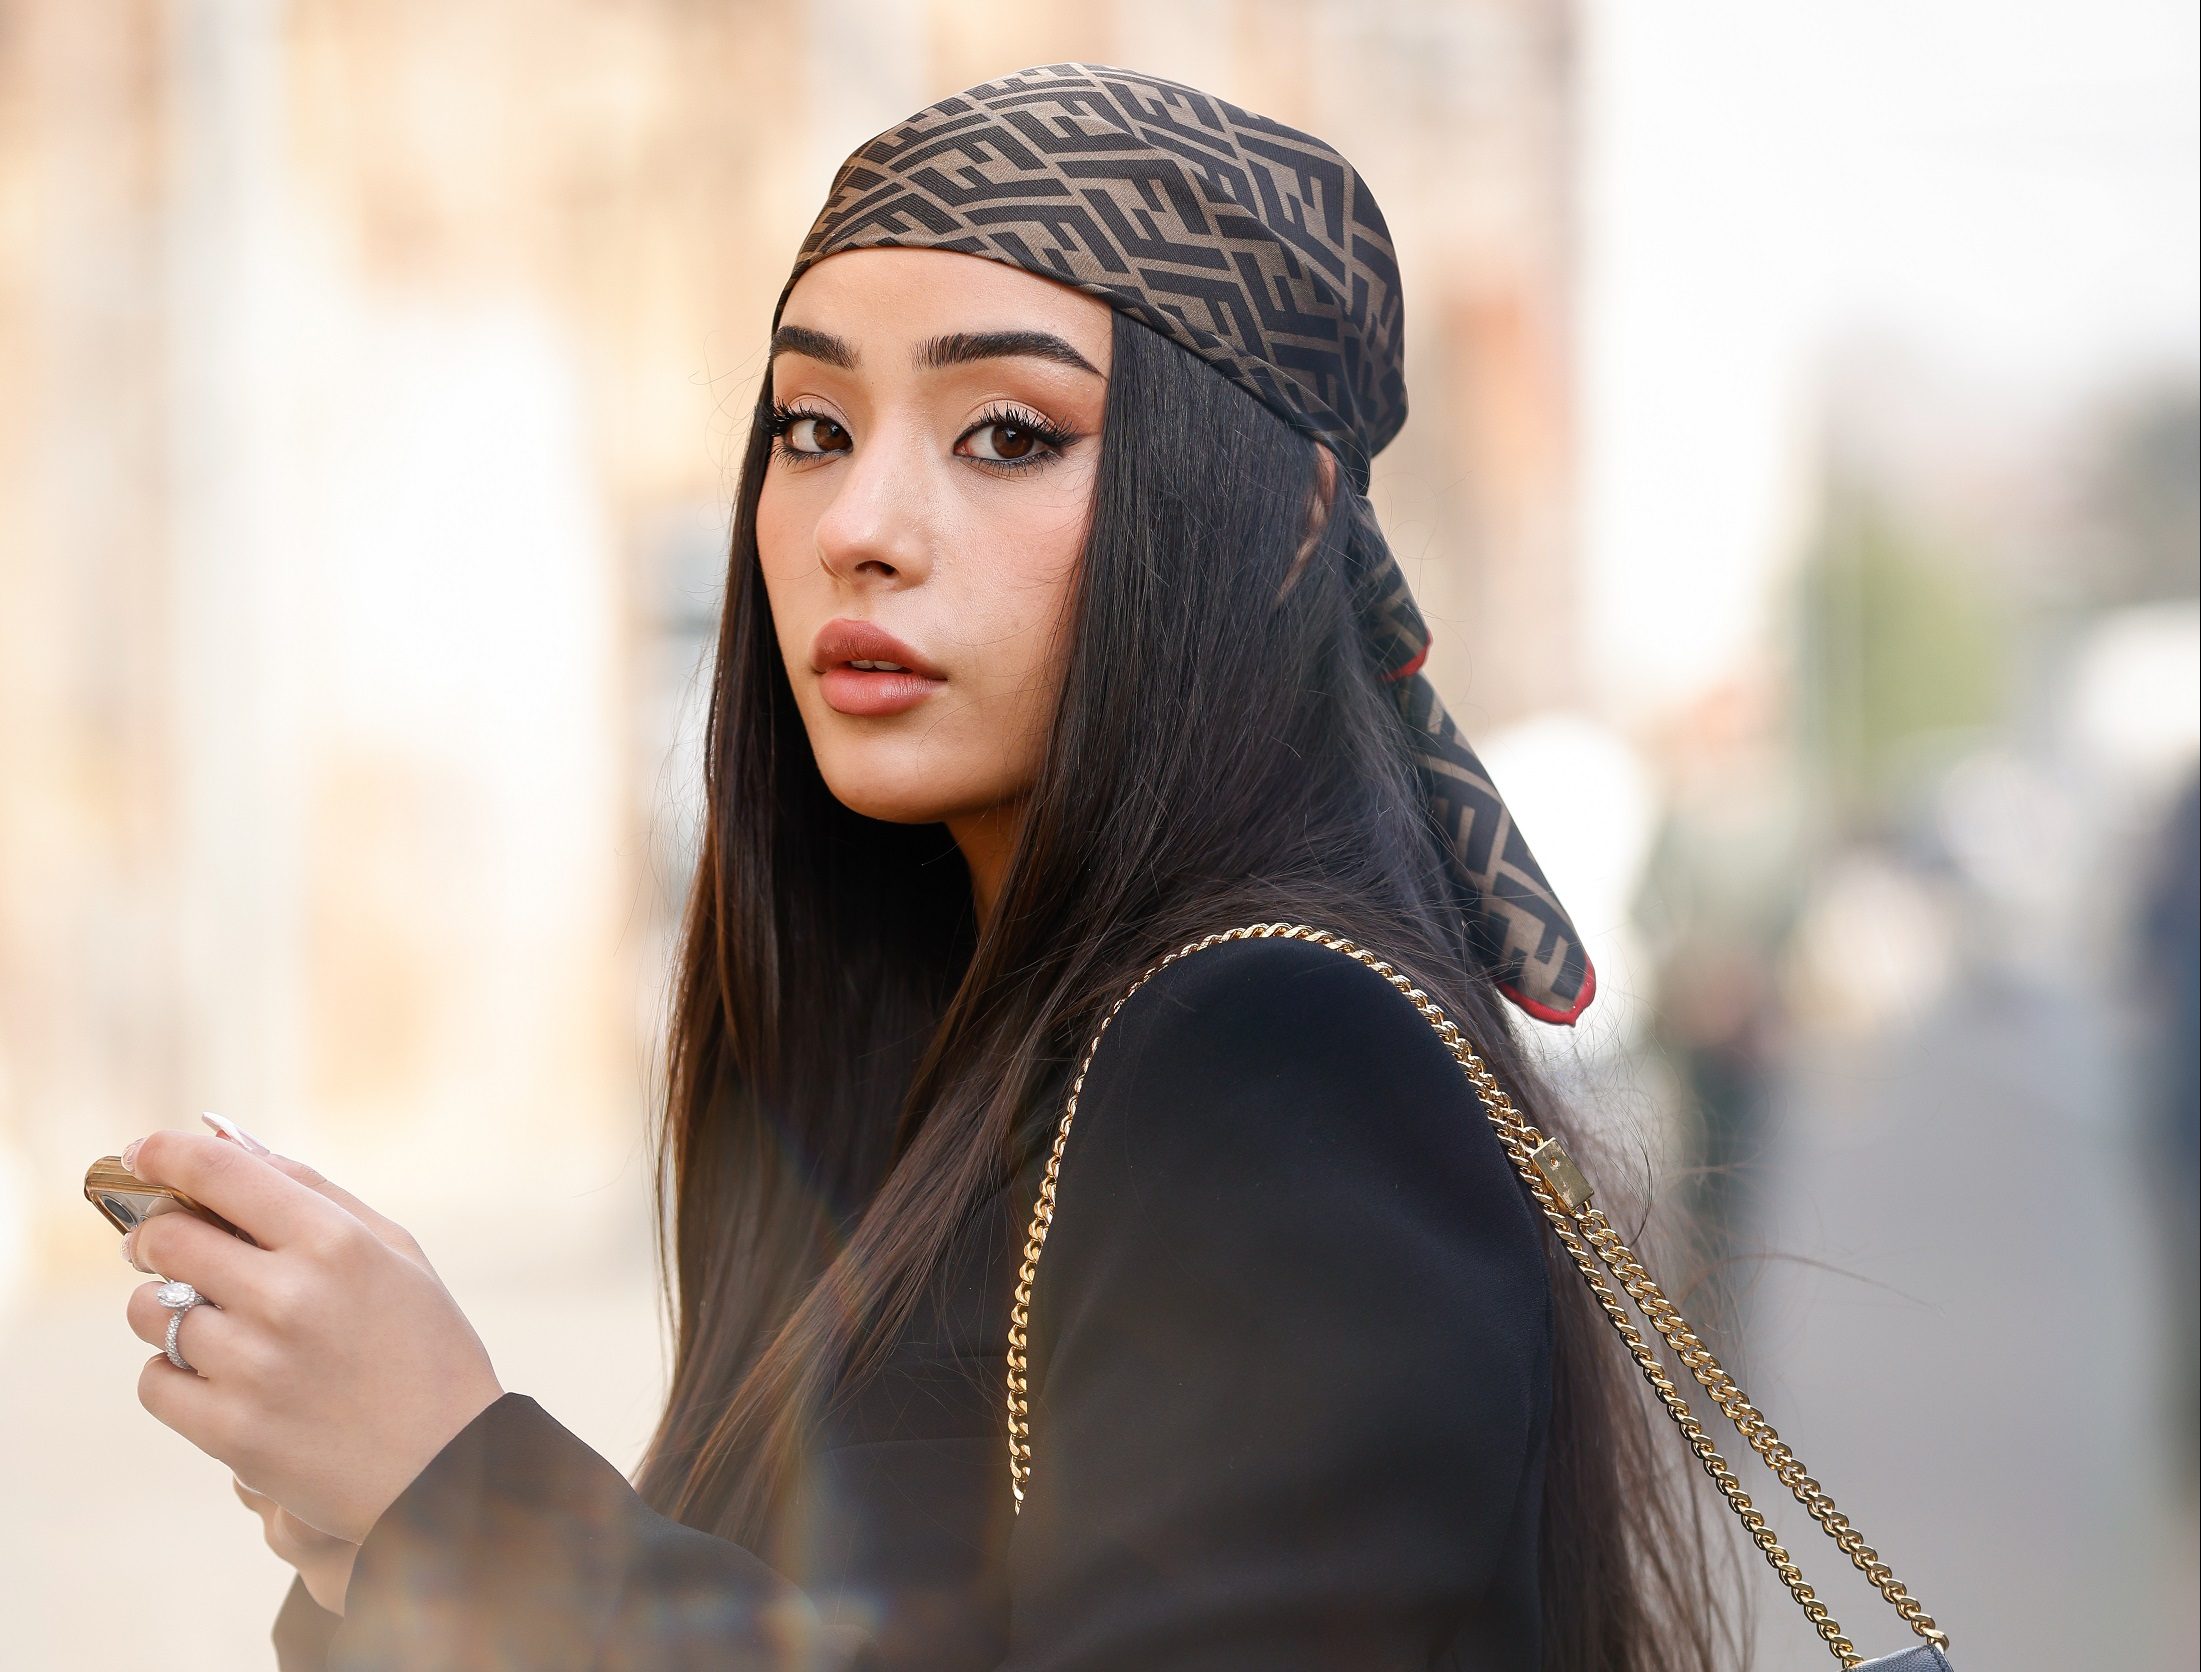 New trend: headscarves tied around the head – here’s how to wear them in style